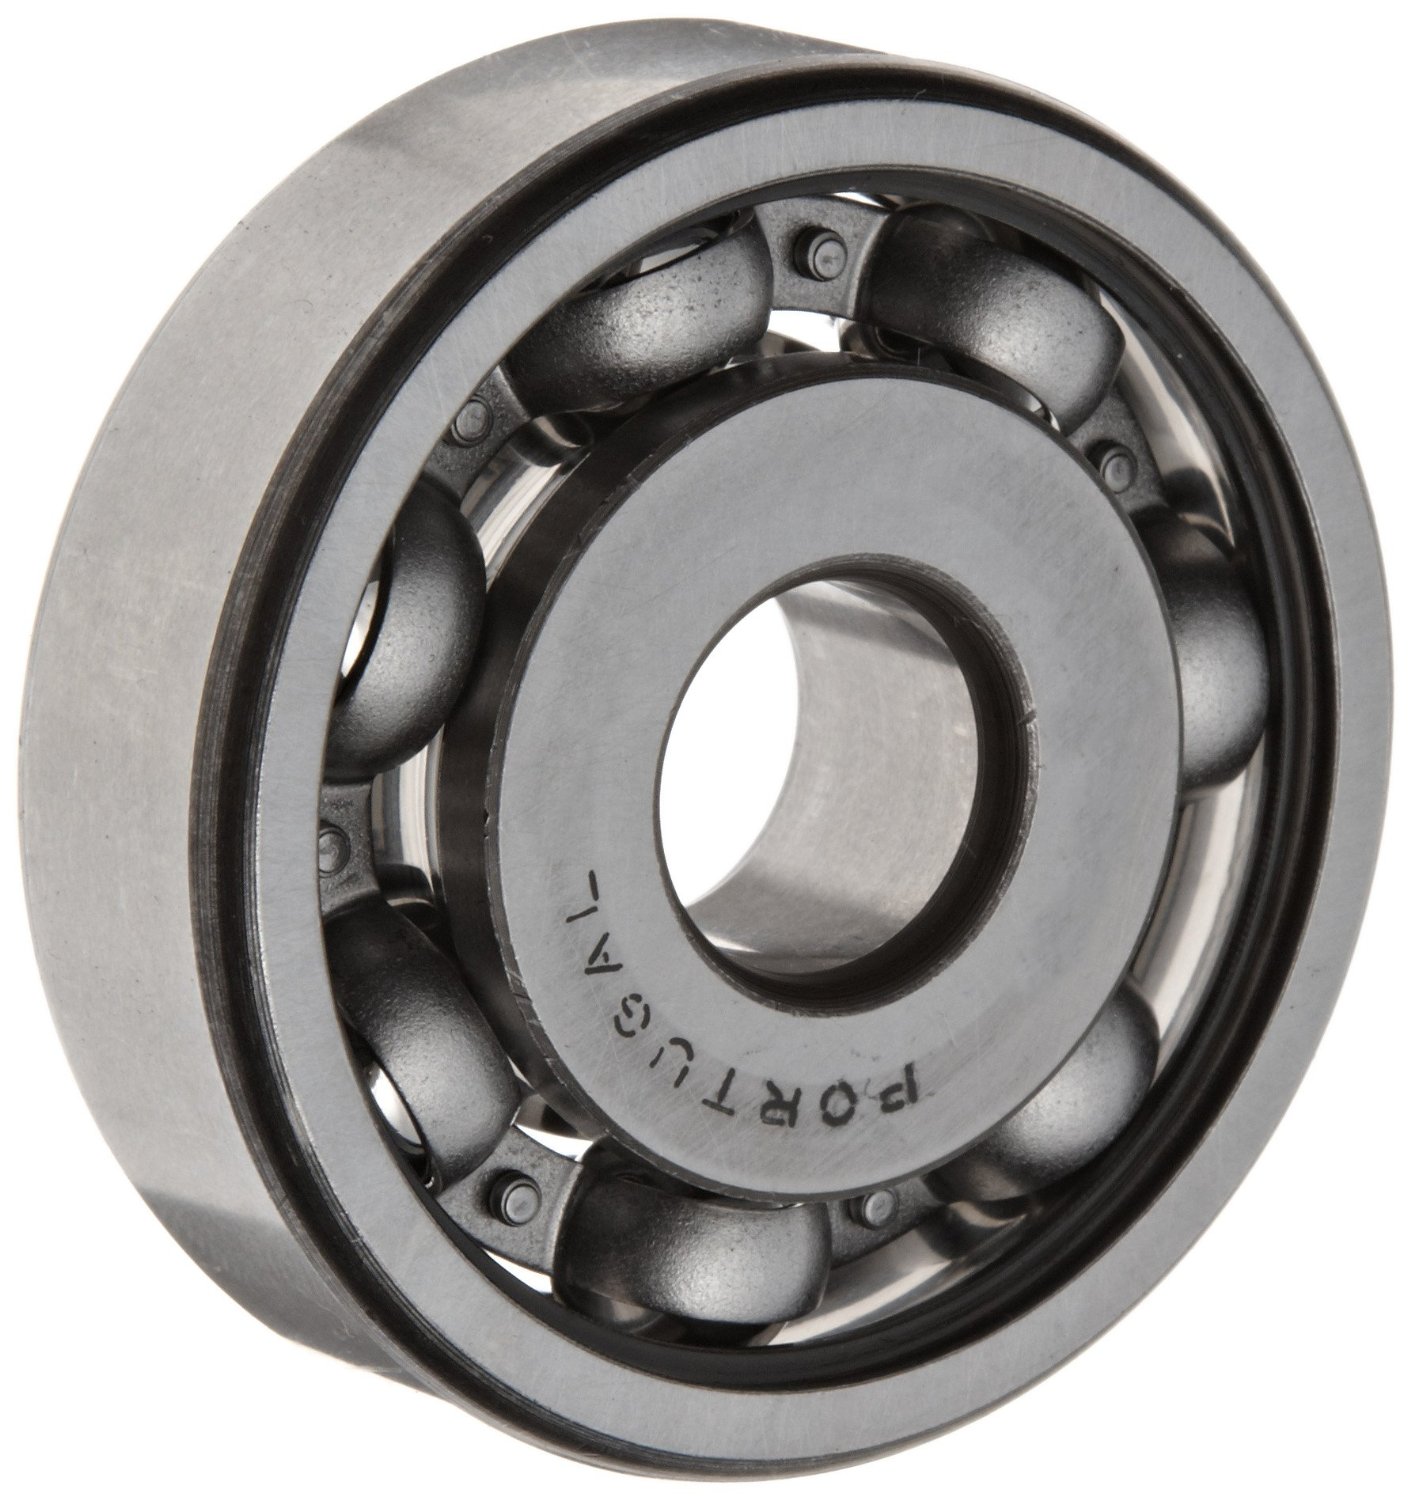 FAG 6026-C3 Deep Groove Ball Bearing, Single Row, ABEC 1 Precision, Open, Steel Cage, C3 Clearance, Metric, 130mm ID, 200mm OD, 33mm Width, 7000rpm Maximum Rotational Speed, 22400lbf Static Load Capacity, 23600lbf Dynamic Load Capacity